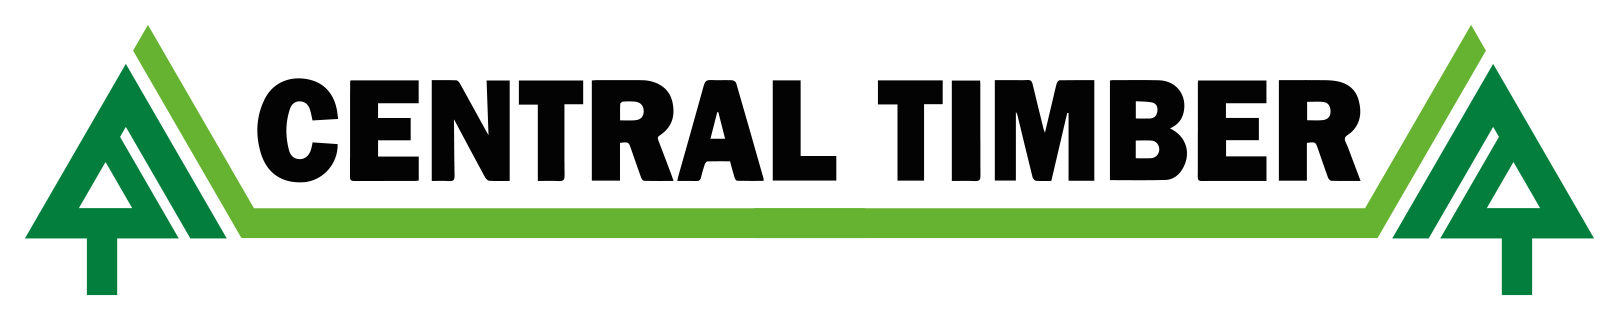 Central Timber